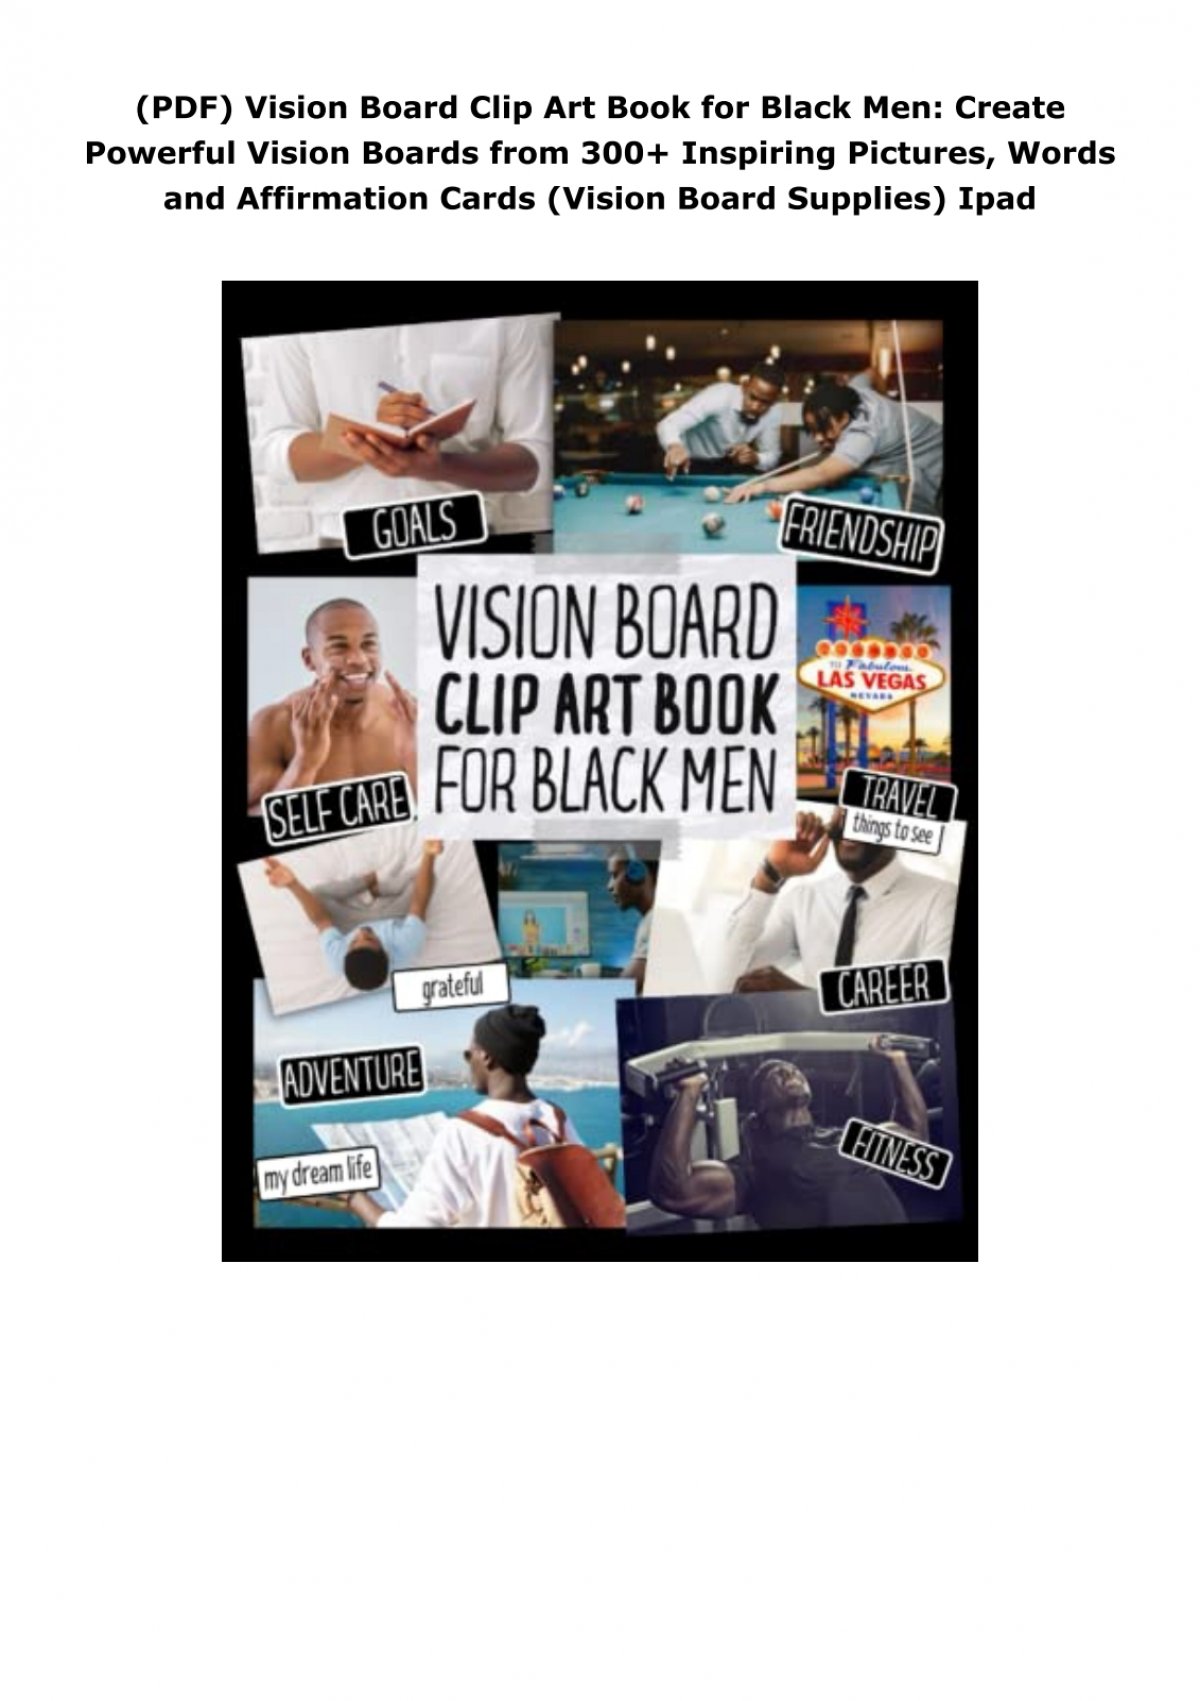 PDF) Vision Board Clip Art Book for Black Men: Create Powerful Vision Boards  from 300+ Inspiring Pictures, Words and Affirmation Cards (Vision Board  Supplies) Ipad